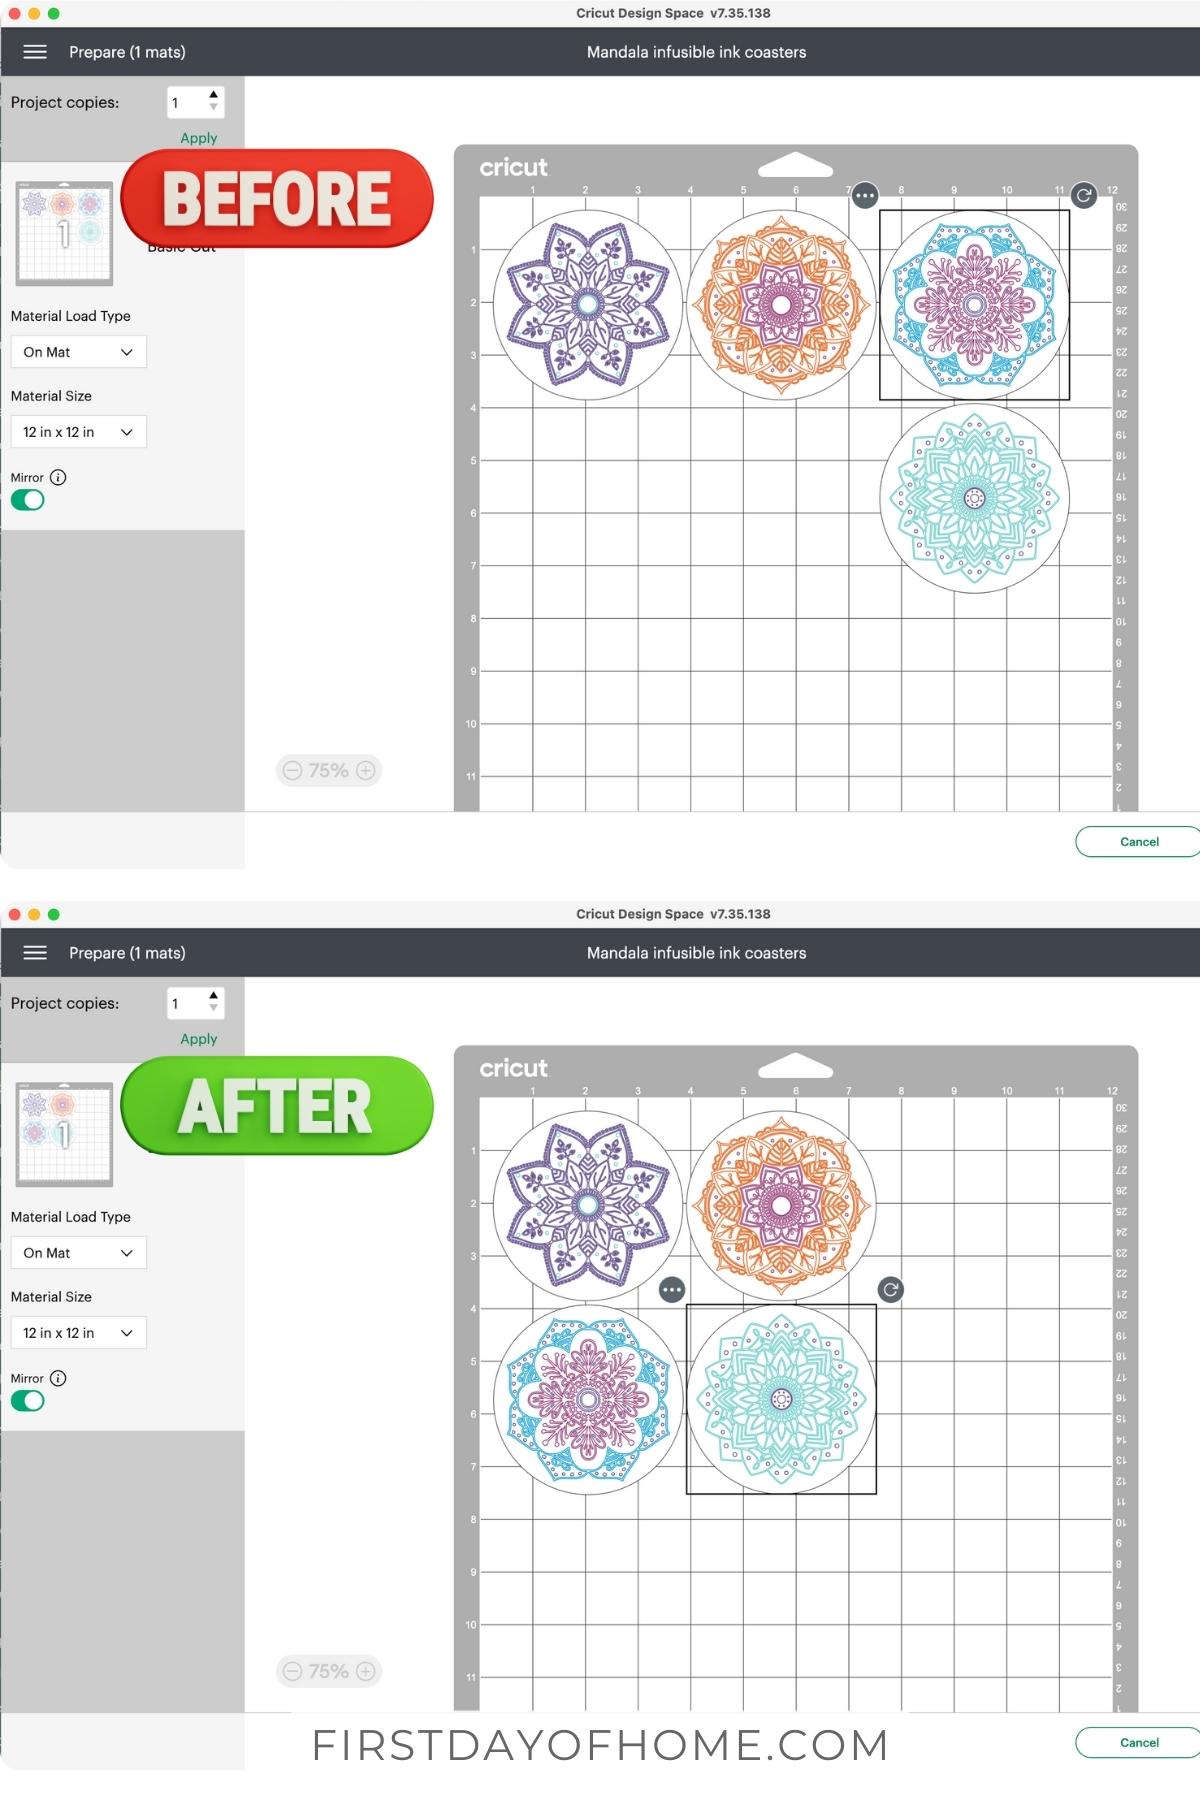 Mandala designs preview in Cricut Design Space before and after adjusting for workspace of infusible ink pens and laser paper